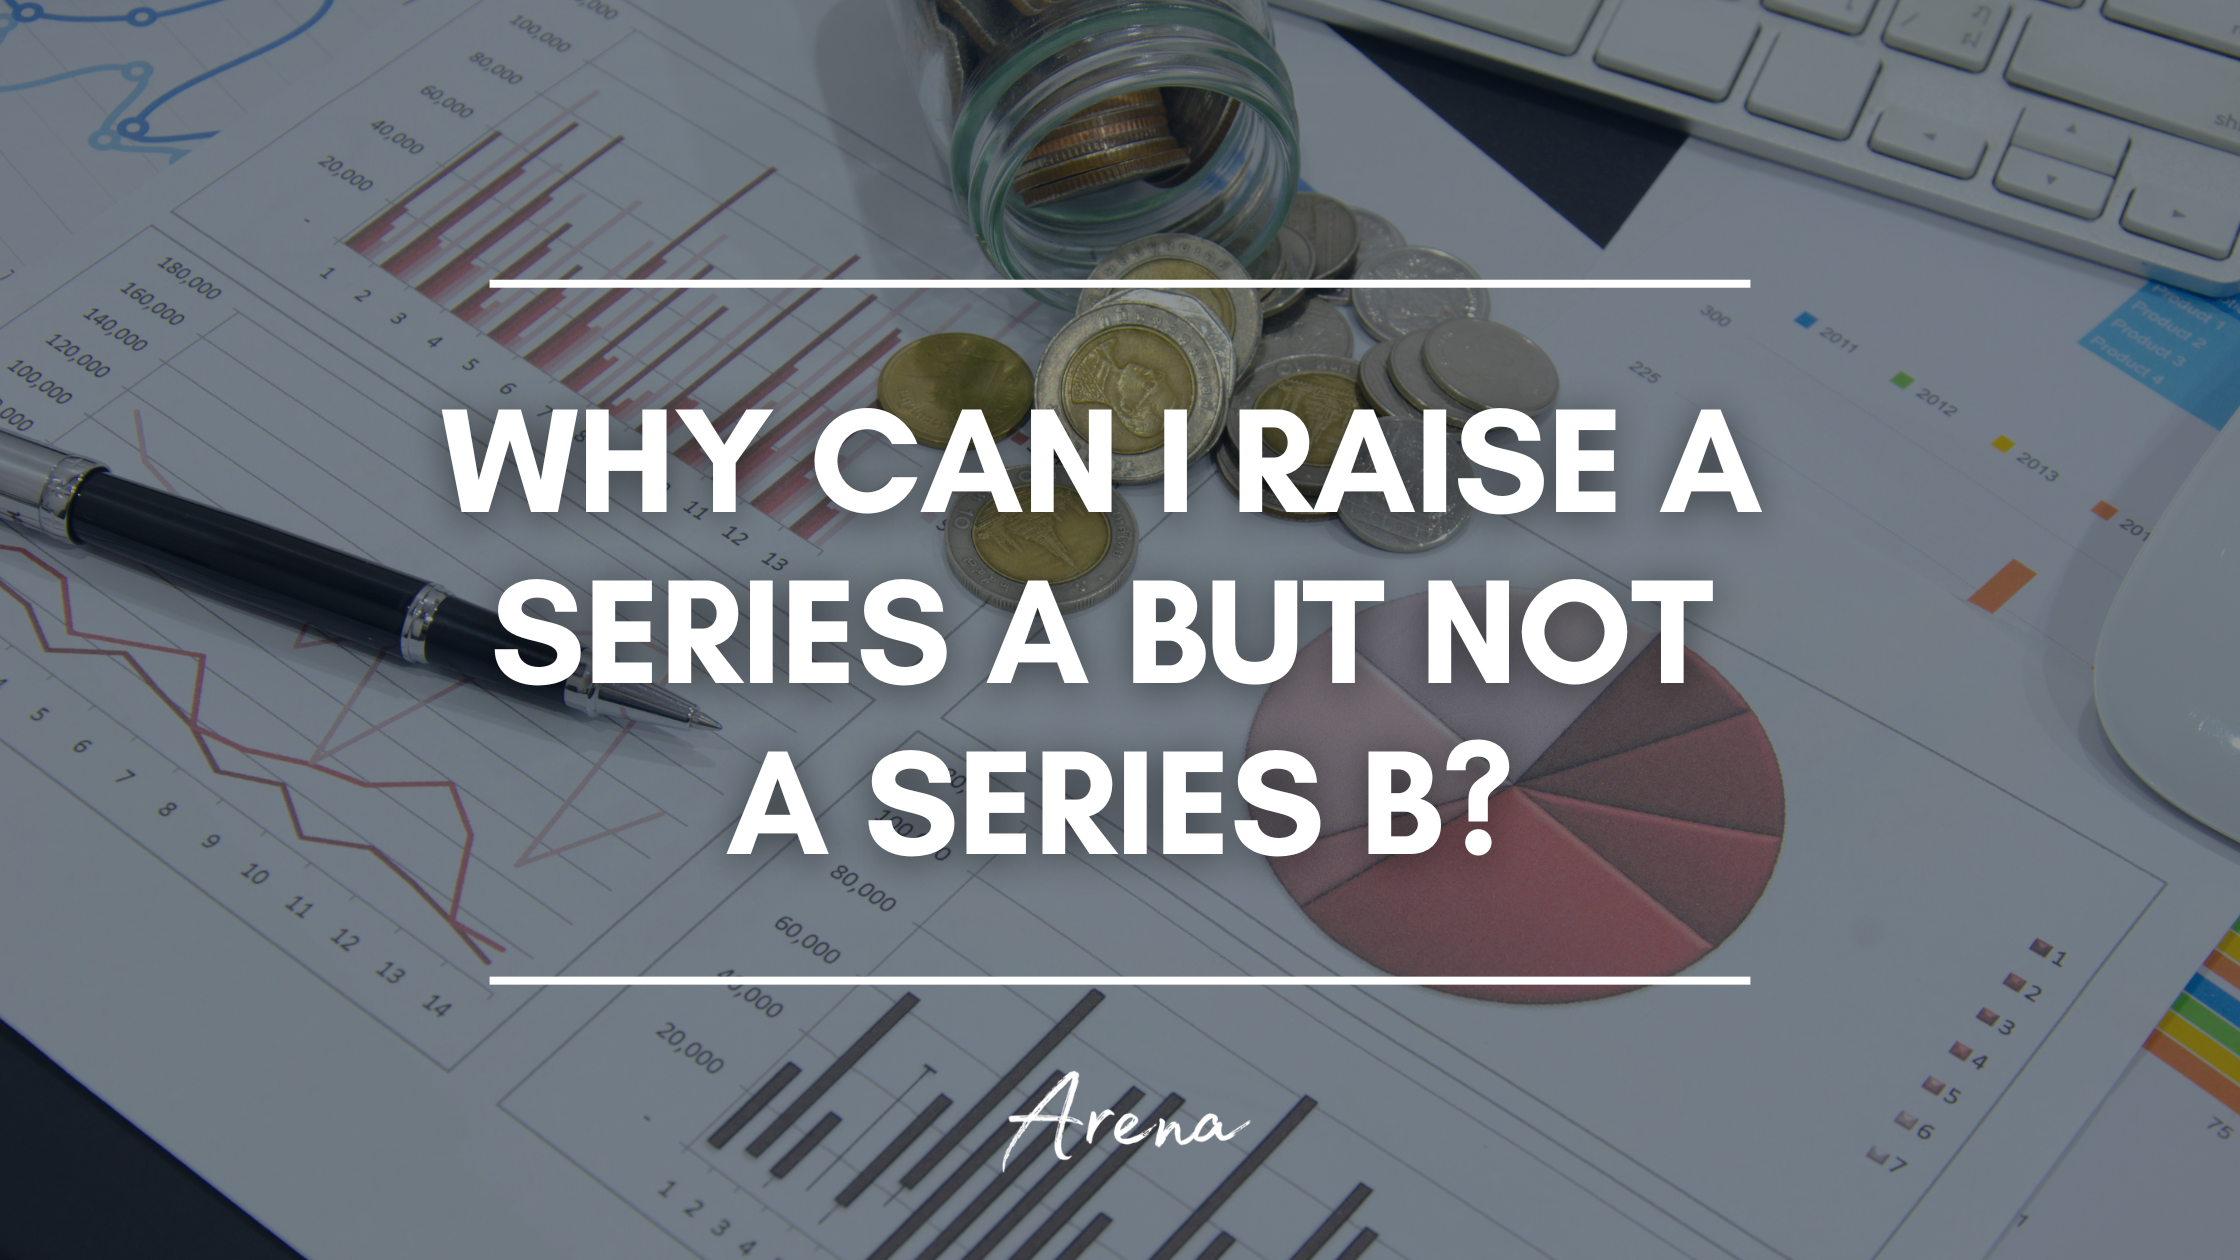 Why Can I Raise a Series A but Not a Series B